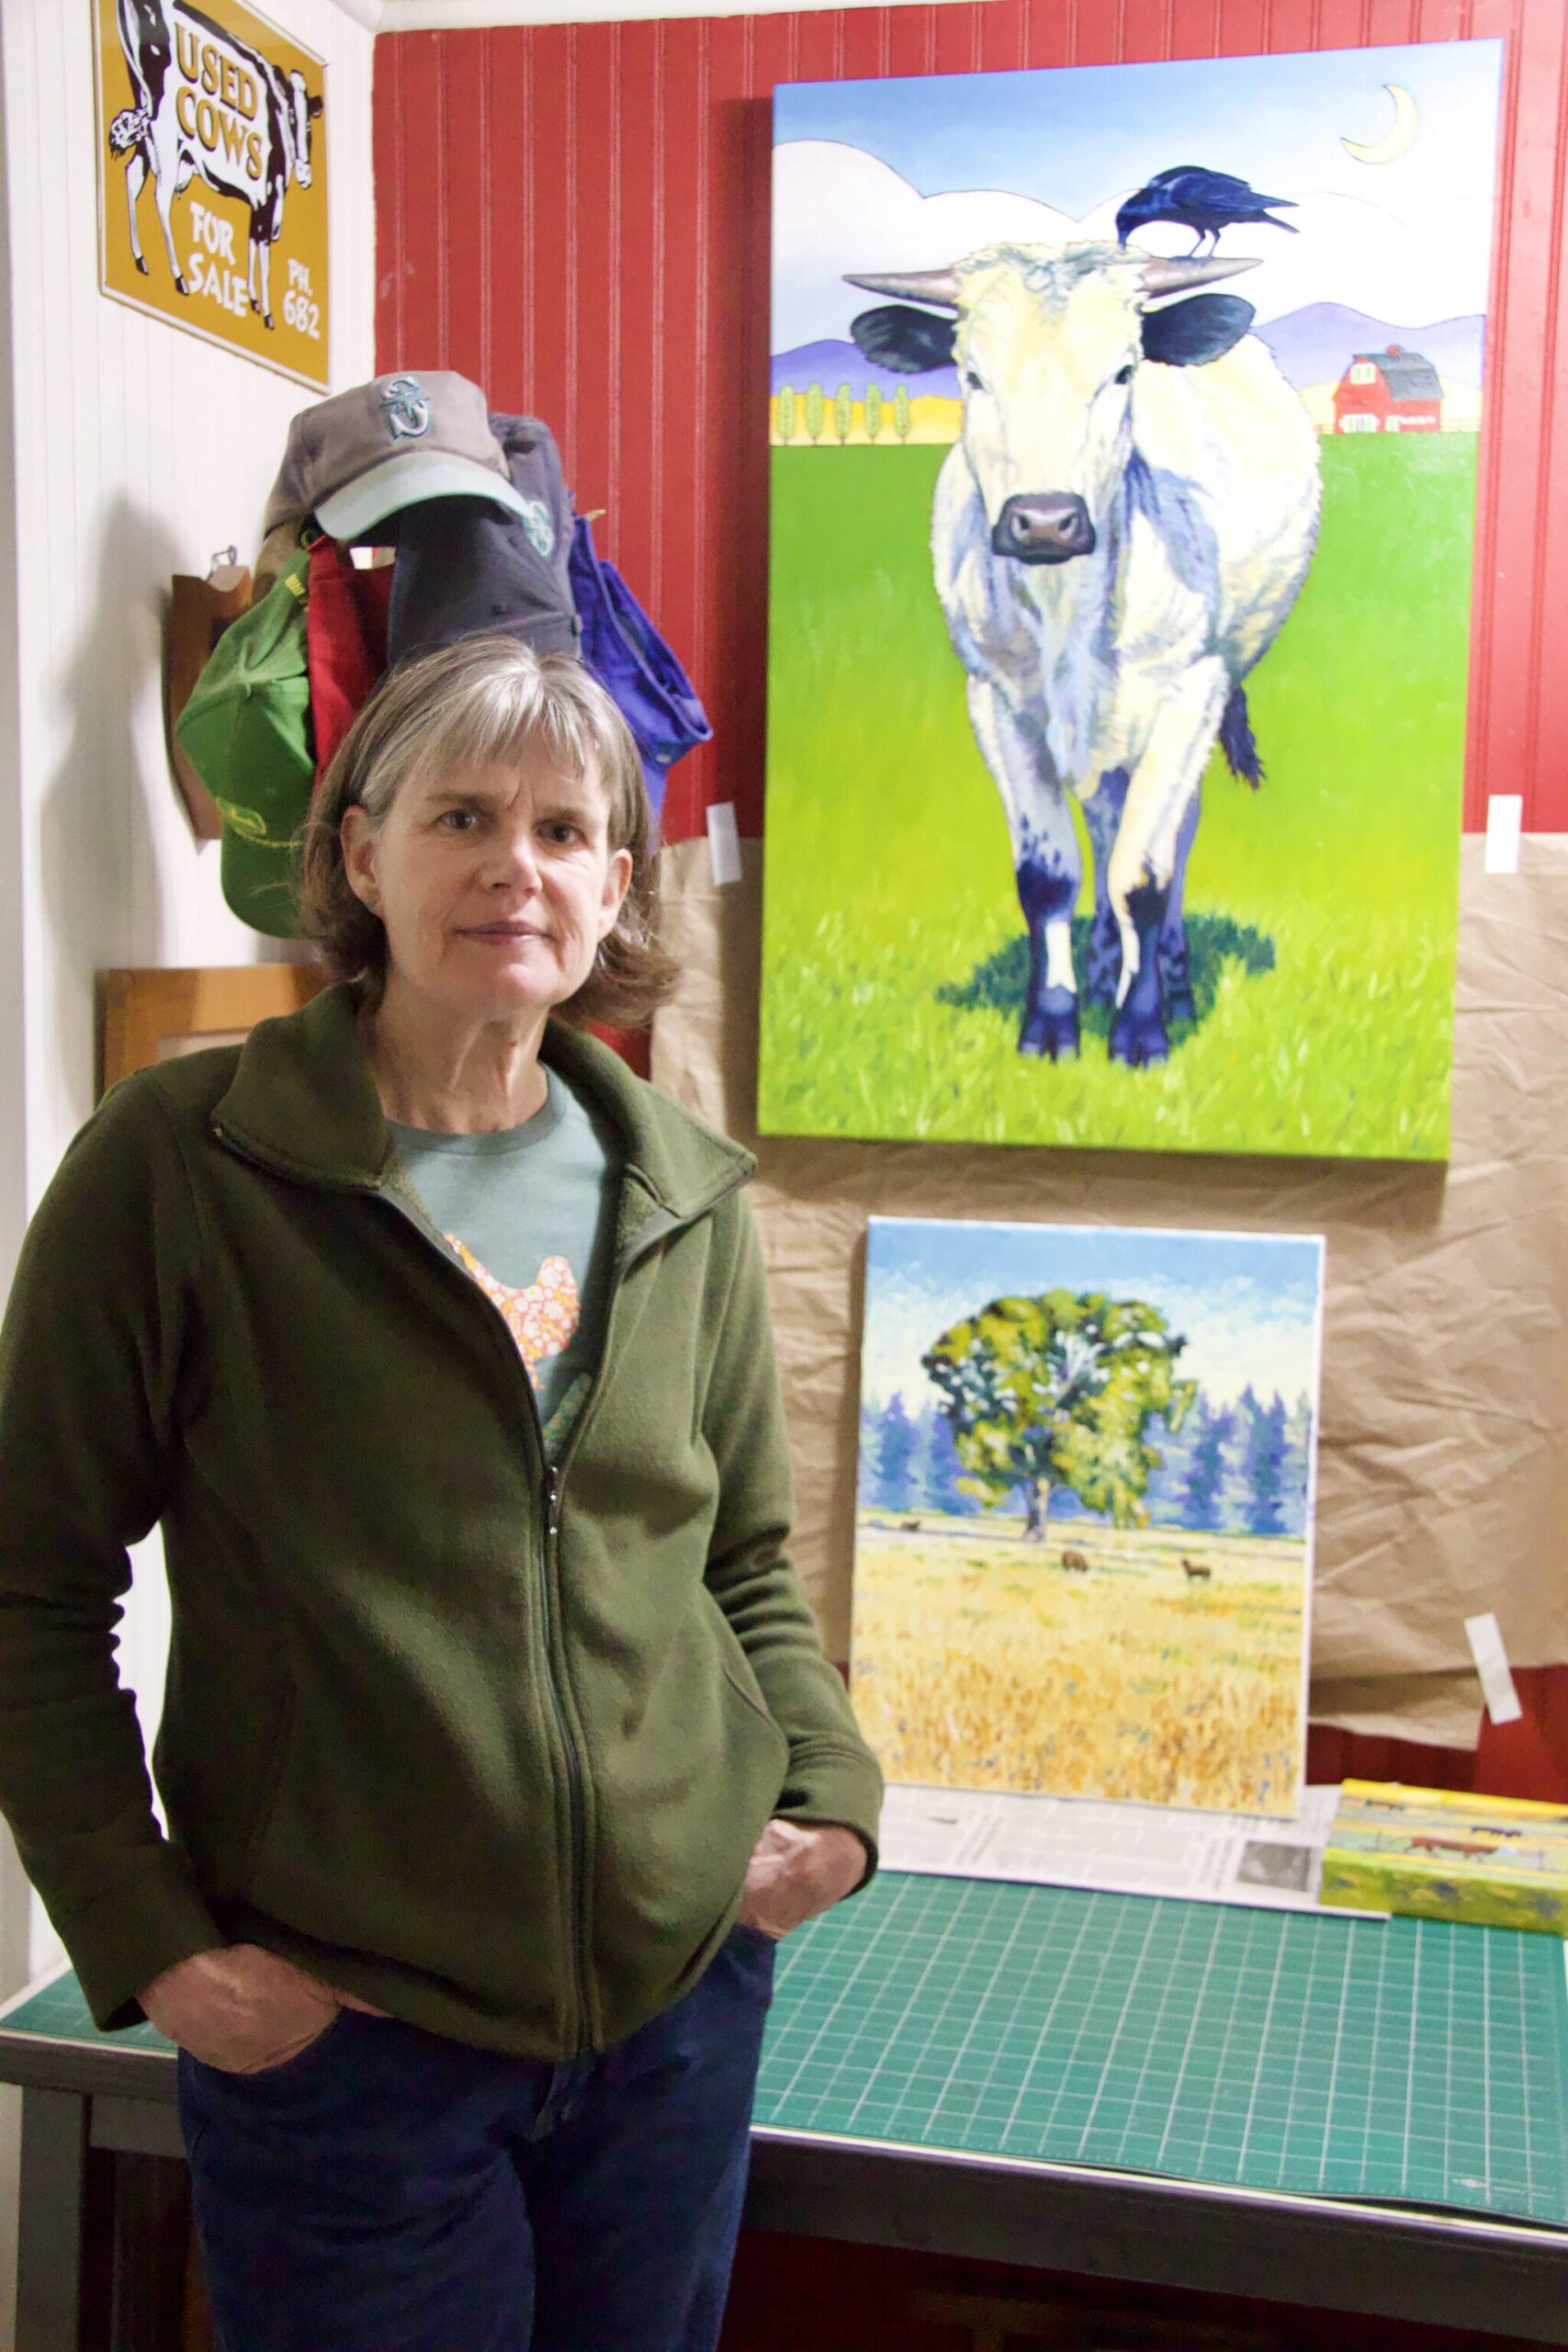 Photo by Rachel Rosen/Whidbey News-Times
Stacey Neumiller stands in front of her paintings.